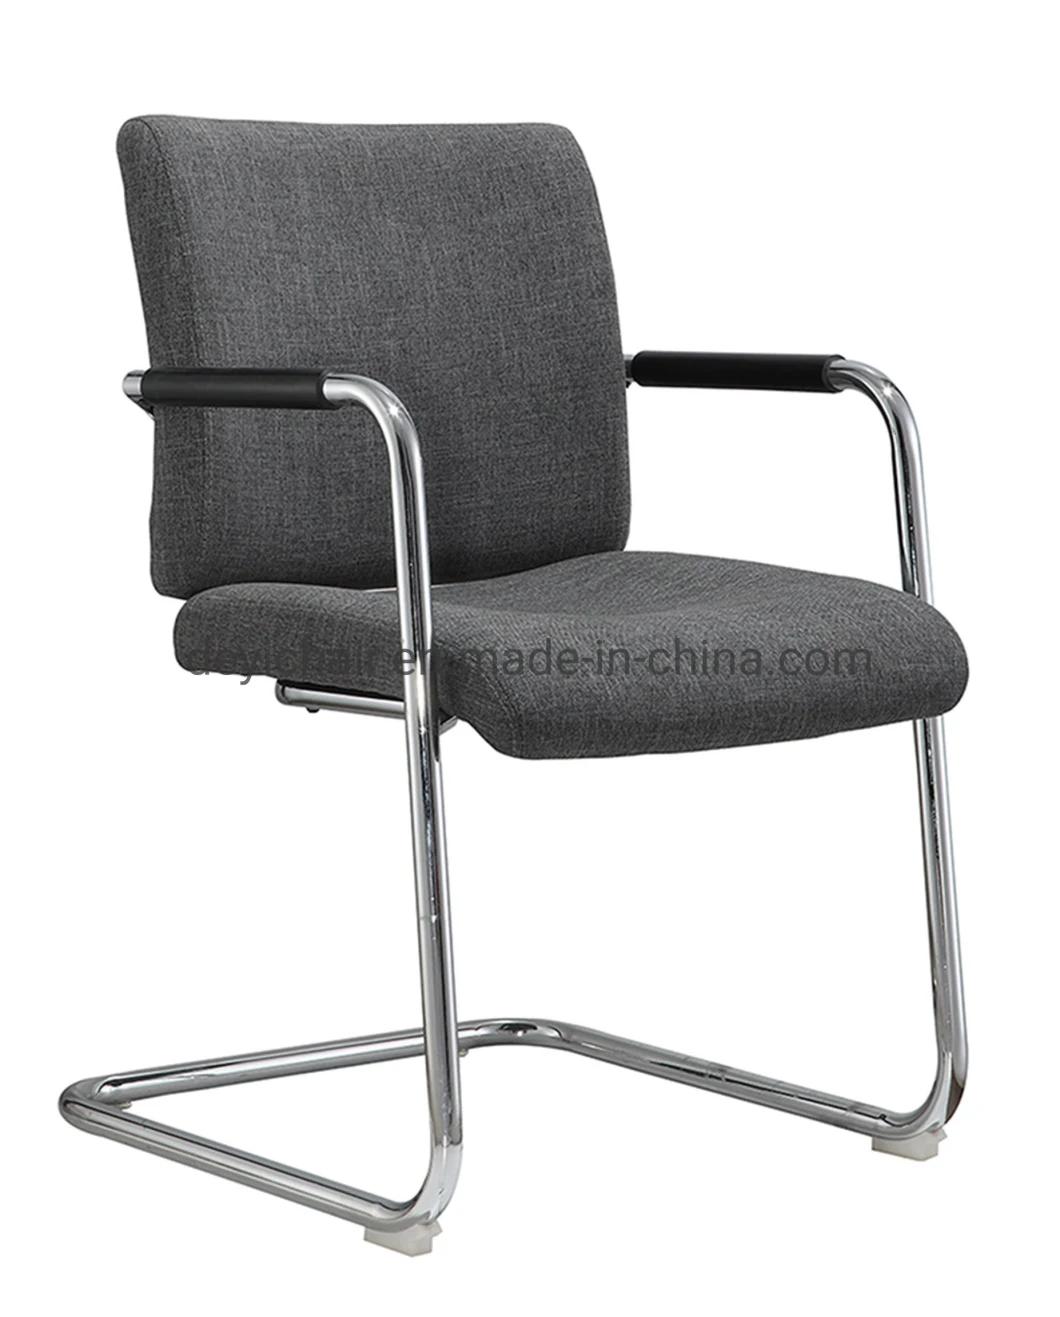 25 Tube 2.0mm Thickness Four Legs Frame with Wheels with Armrest Medium Mesh Back Fabric Seat Conference Chair